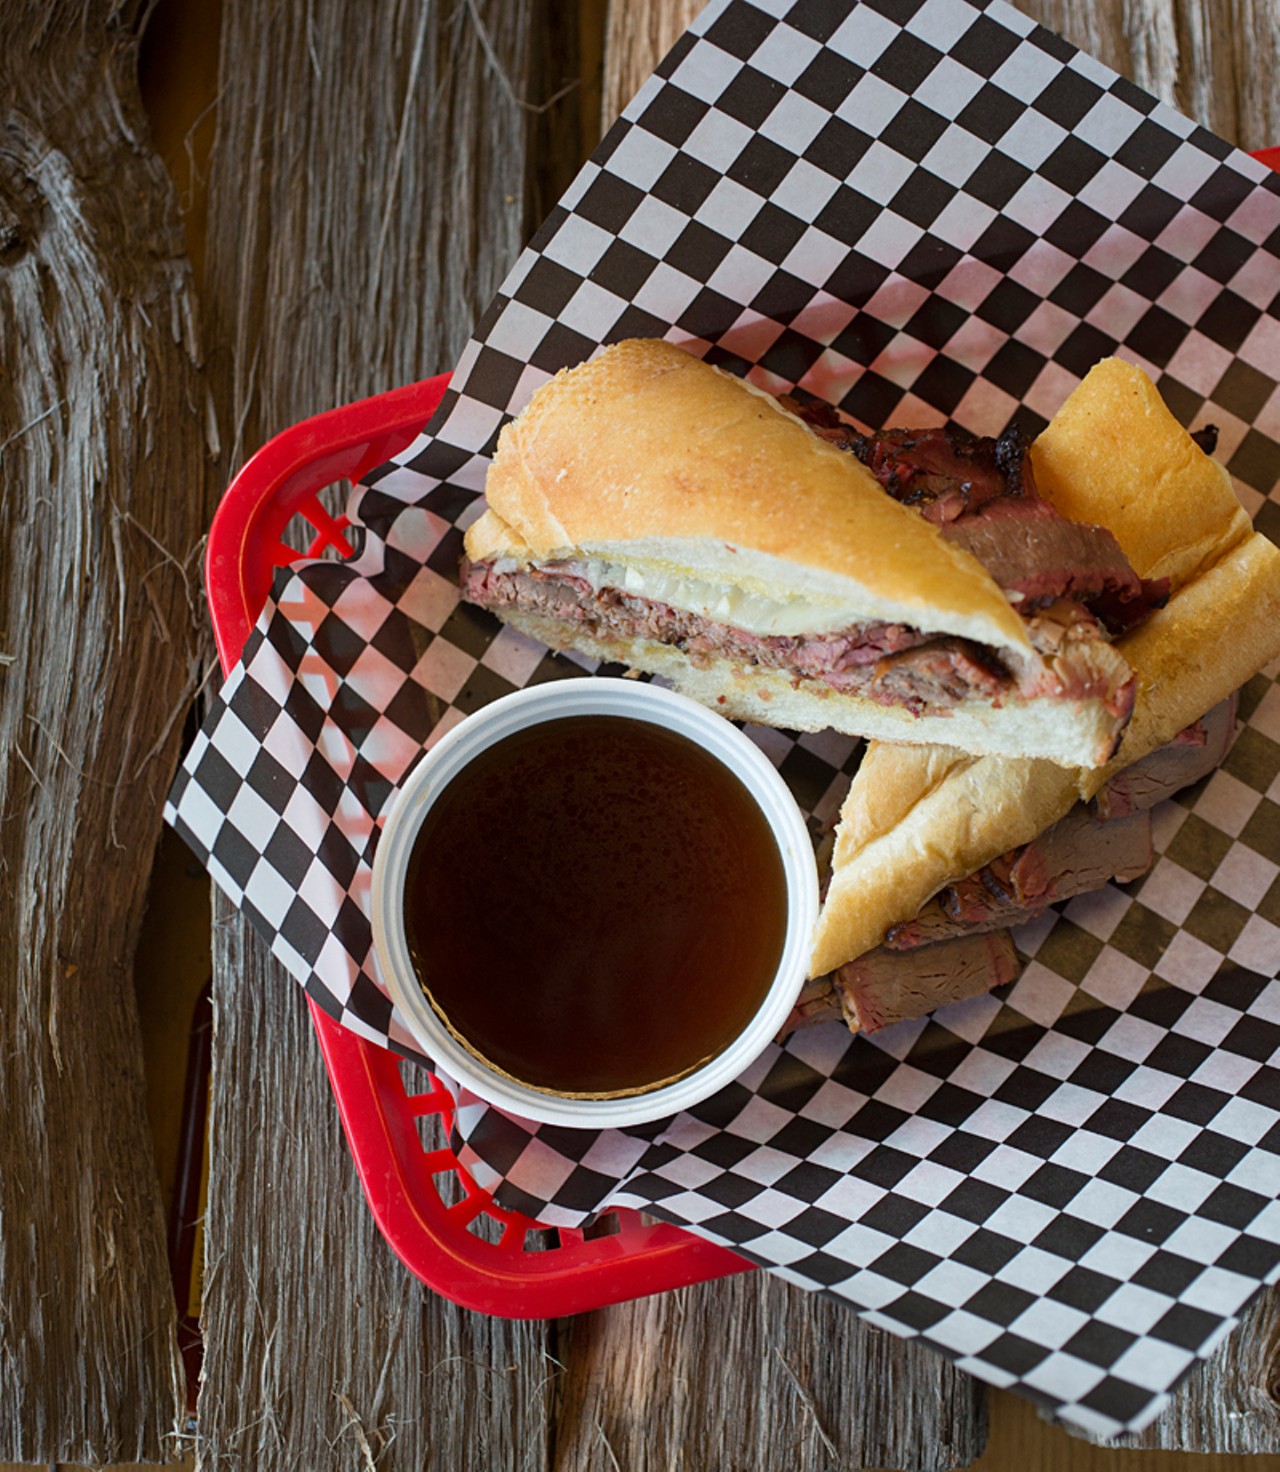 The "Dip": beef brisket on garlic French bread with provolone and jus for dipping.